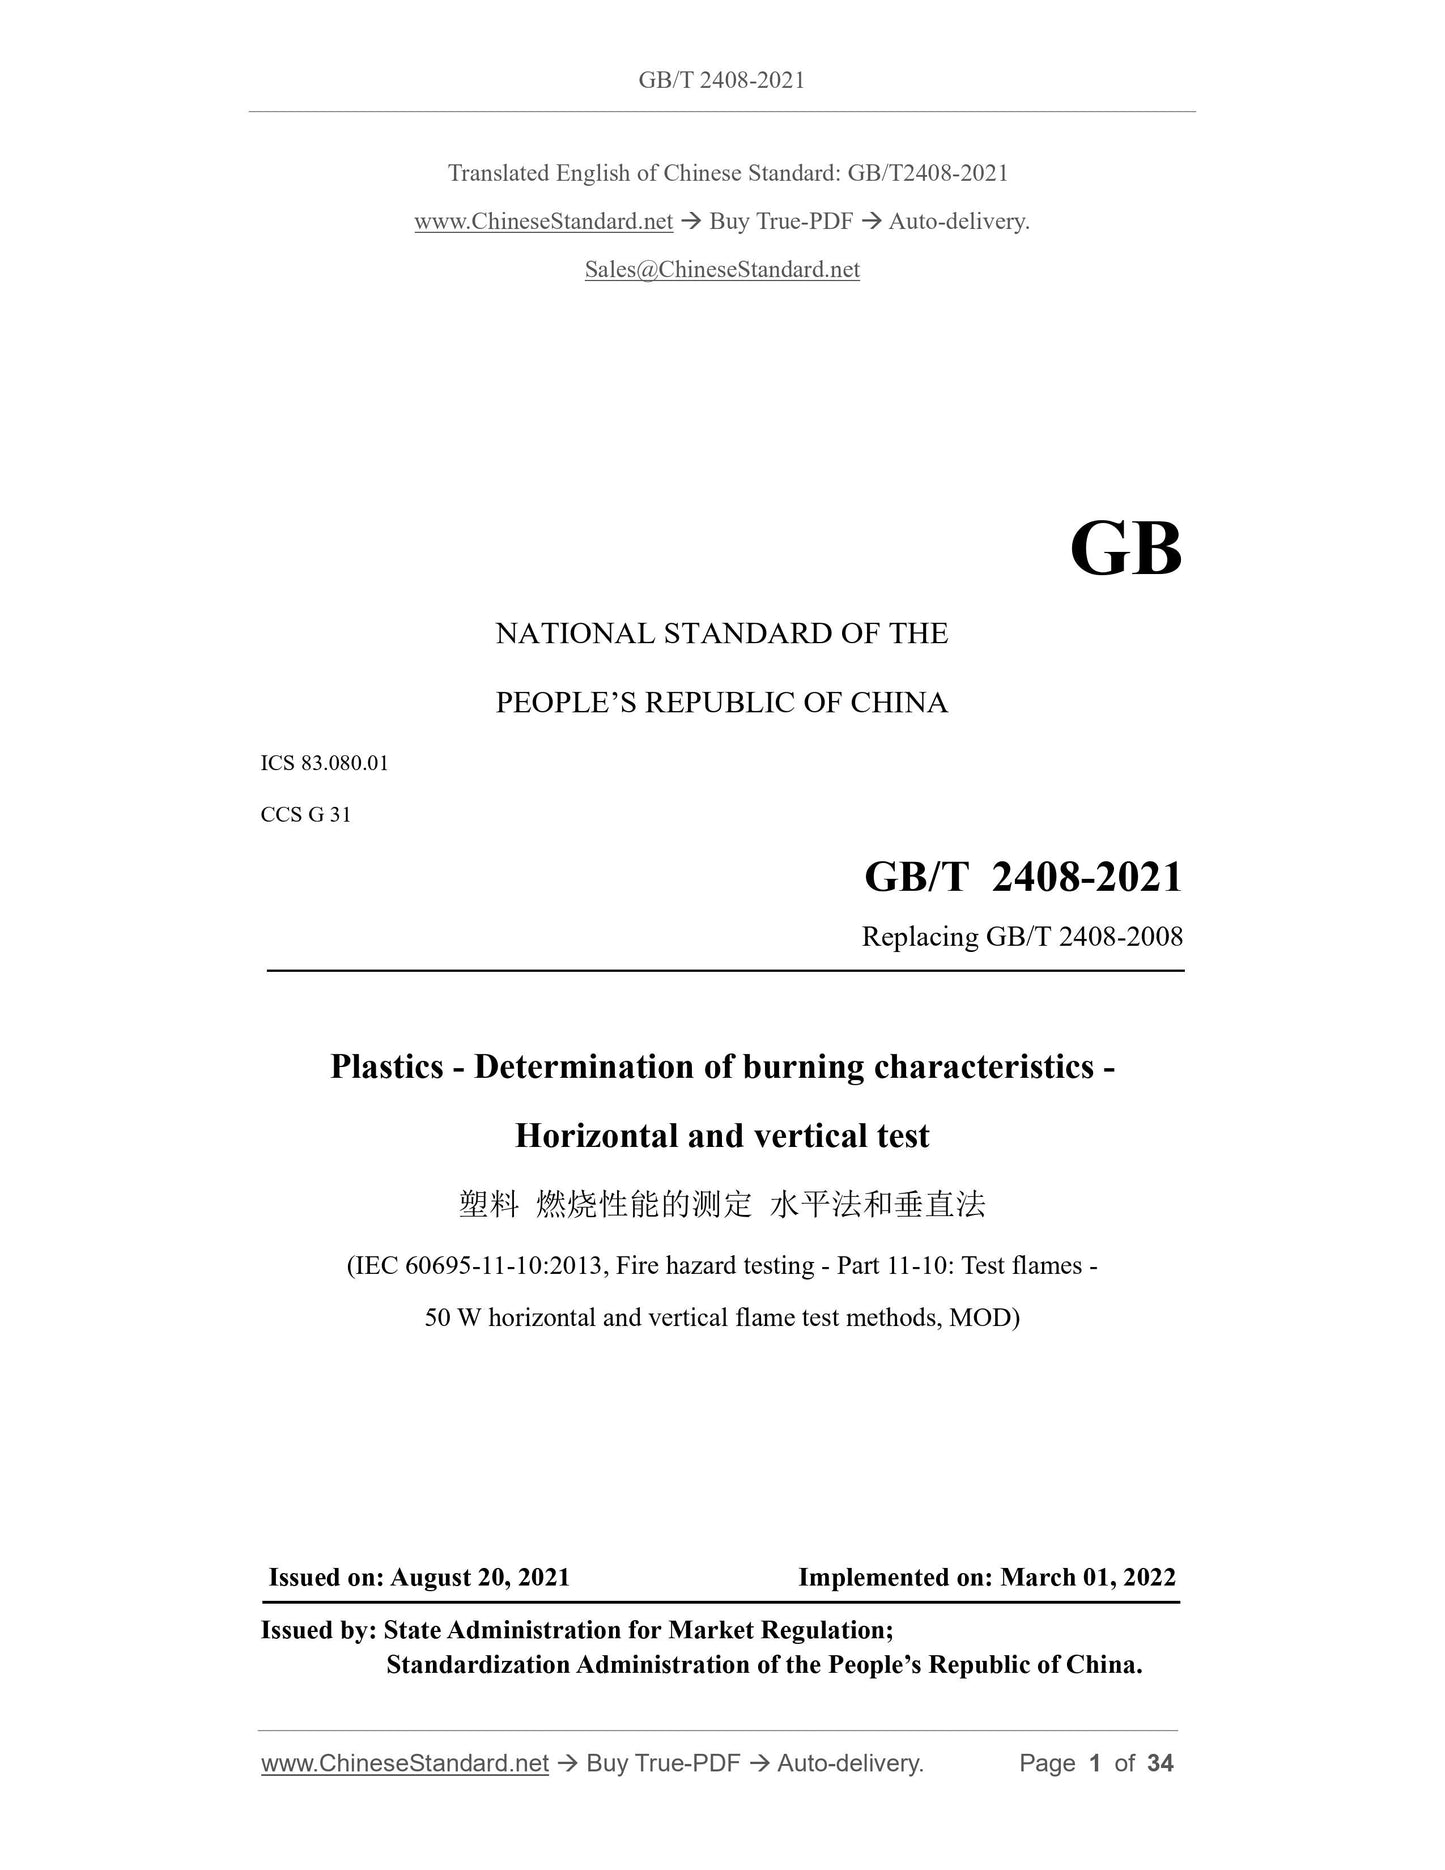 GB/T 2408-2021 Page 1